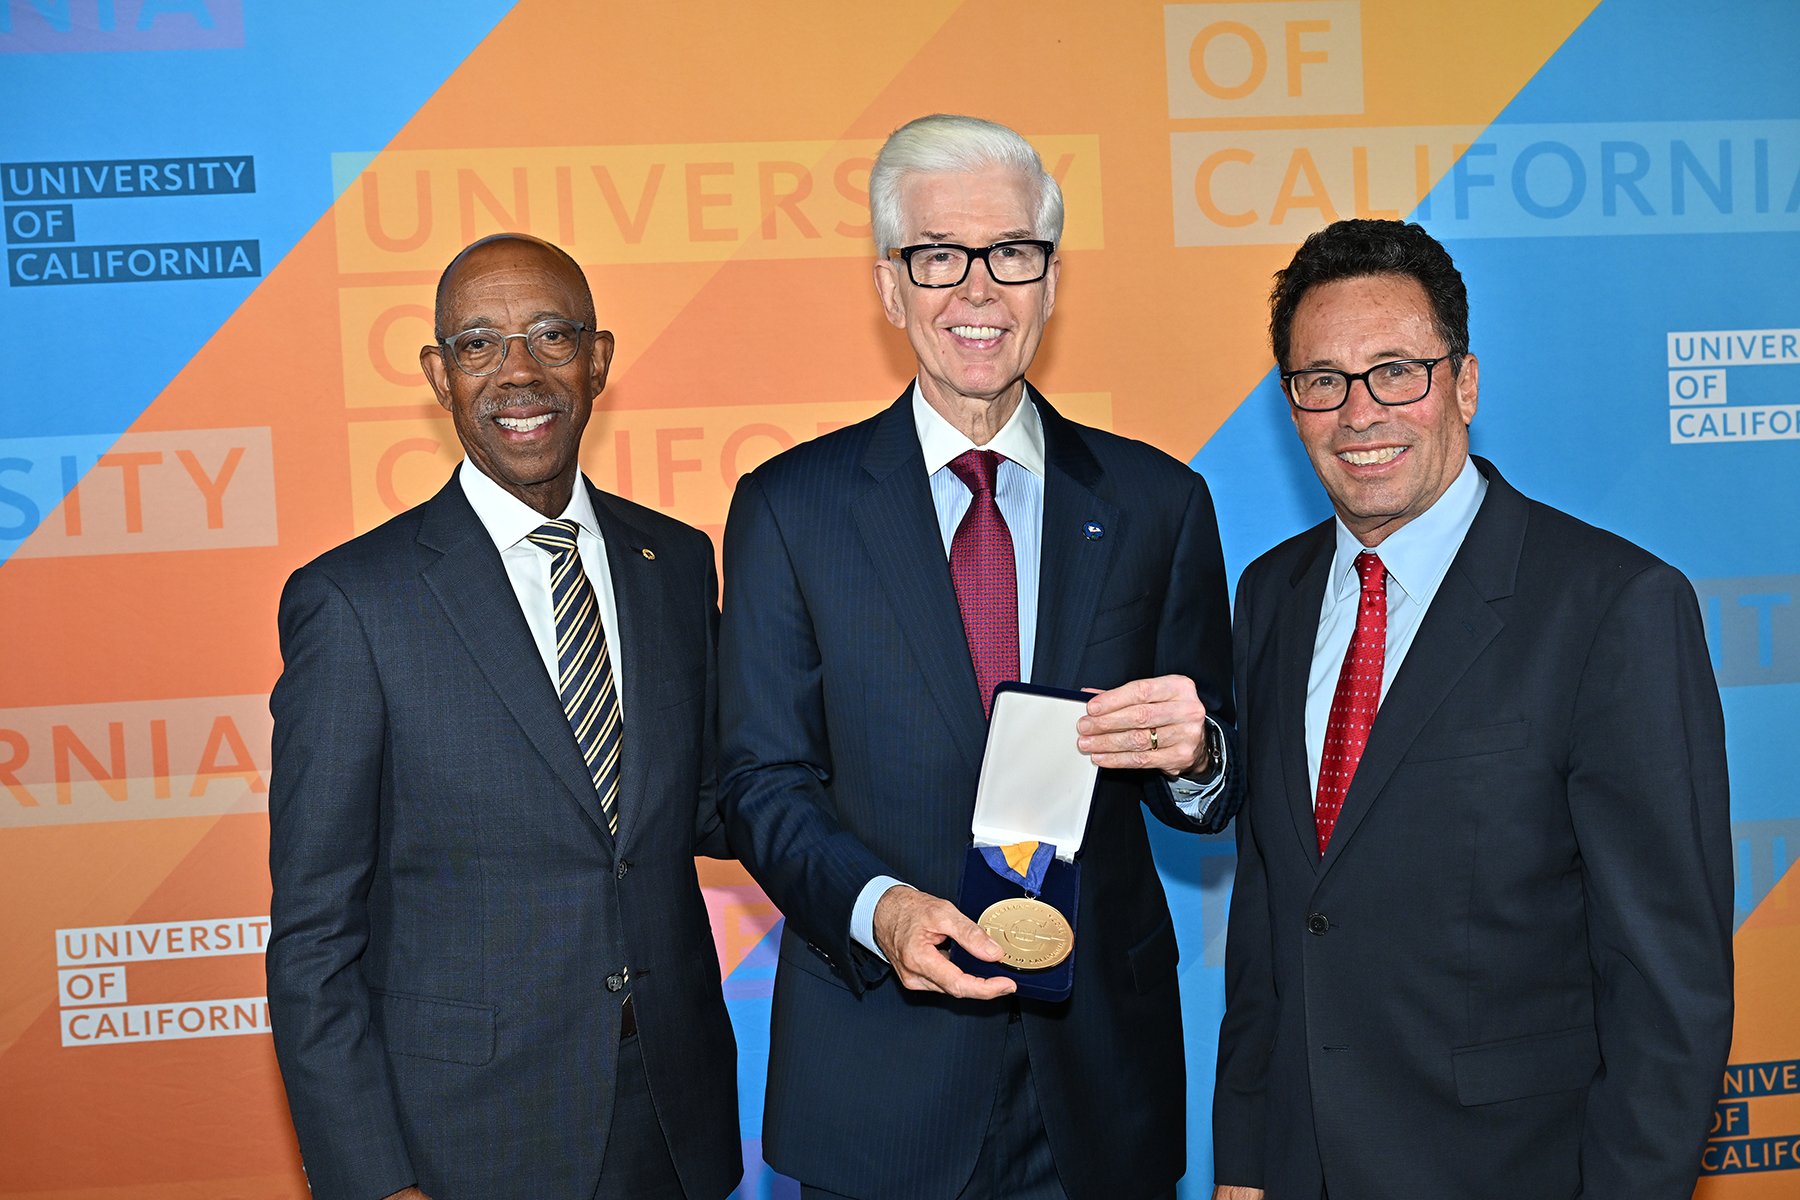 From left to right, President Drake, former Gov. Gray Davis and UC Board of Regents Chair Richard Leib at an event honoring Gov. Davis held on Sept. 20 at UCLA.